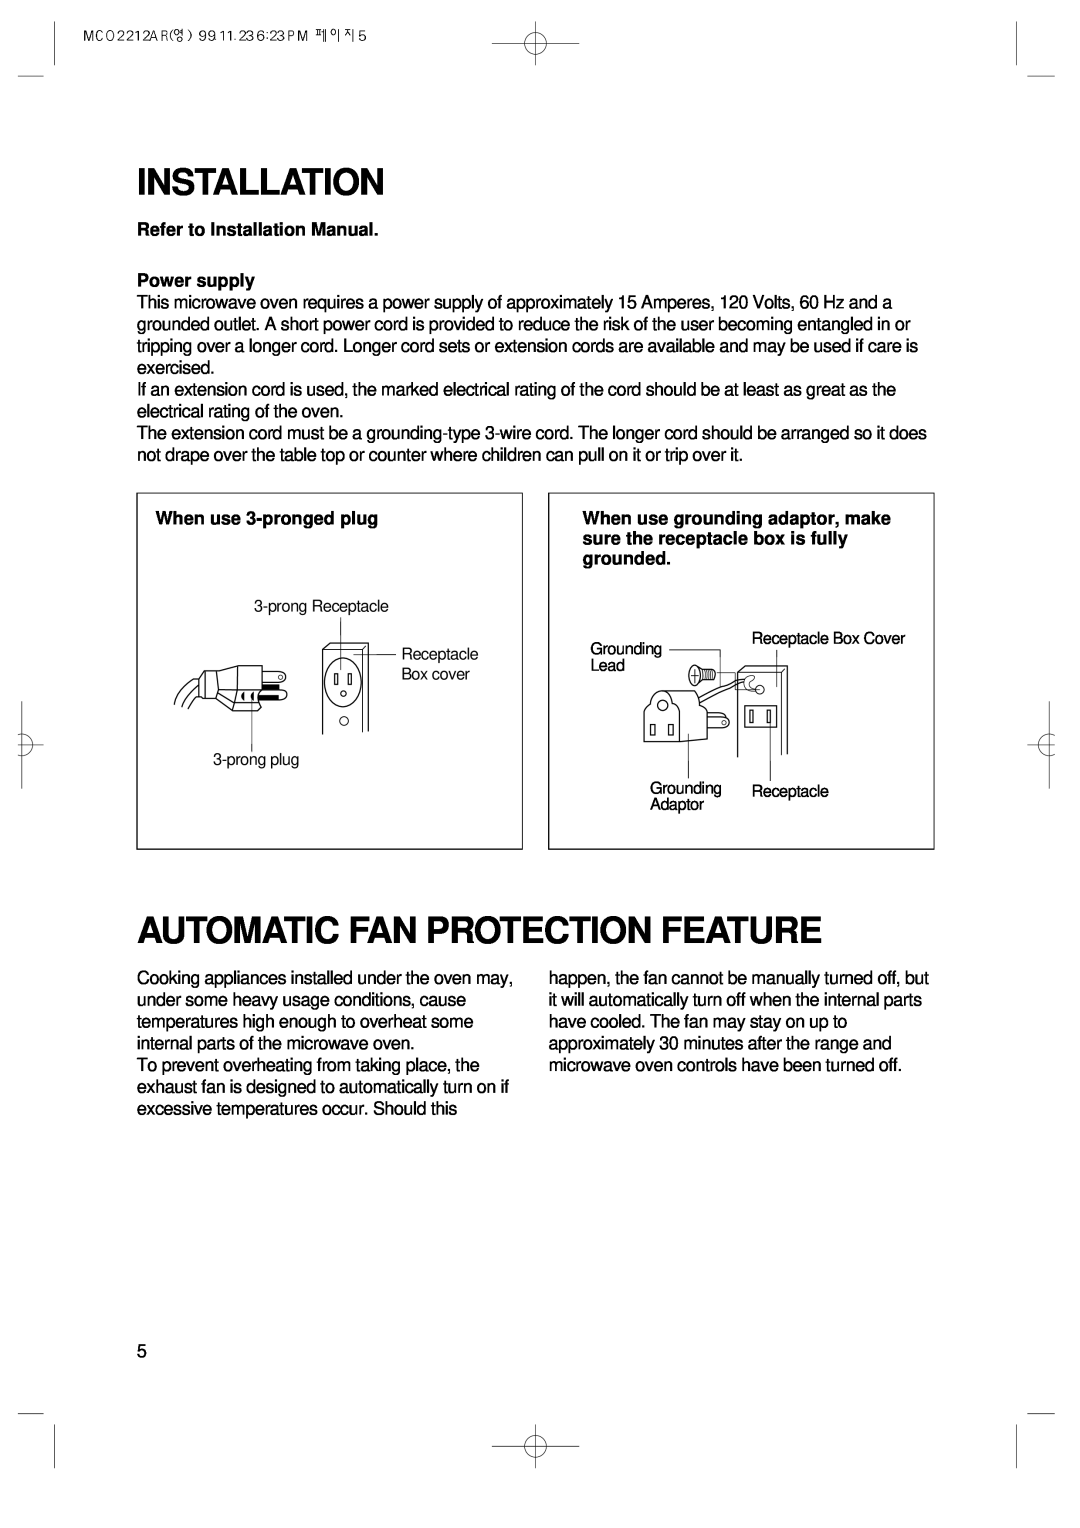 Magic Chef MCO2212AR manual Automatic Fan Protection Feature, Refer to Installation Manual Power supply 